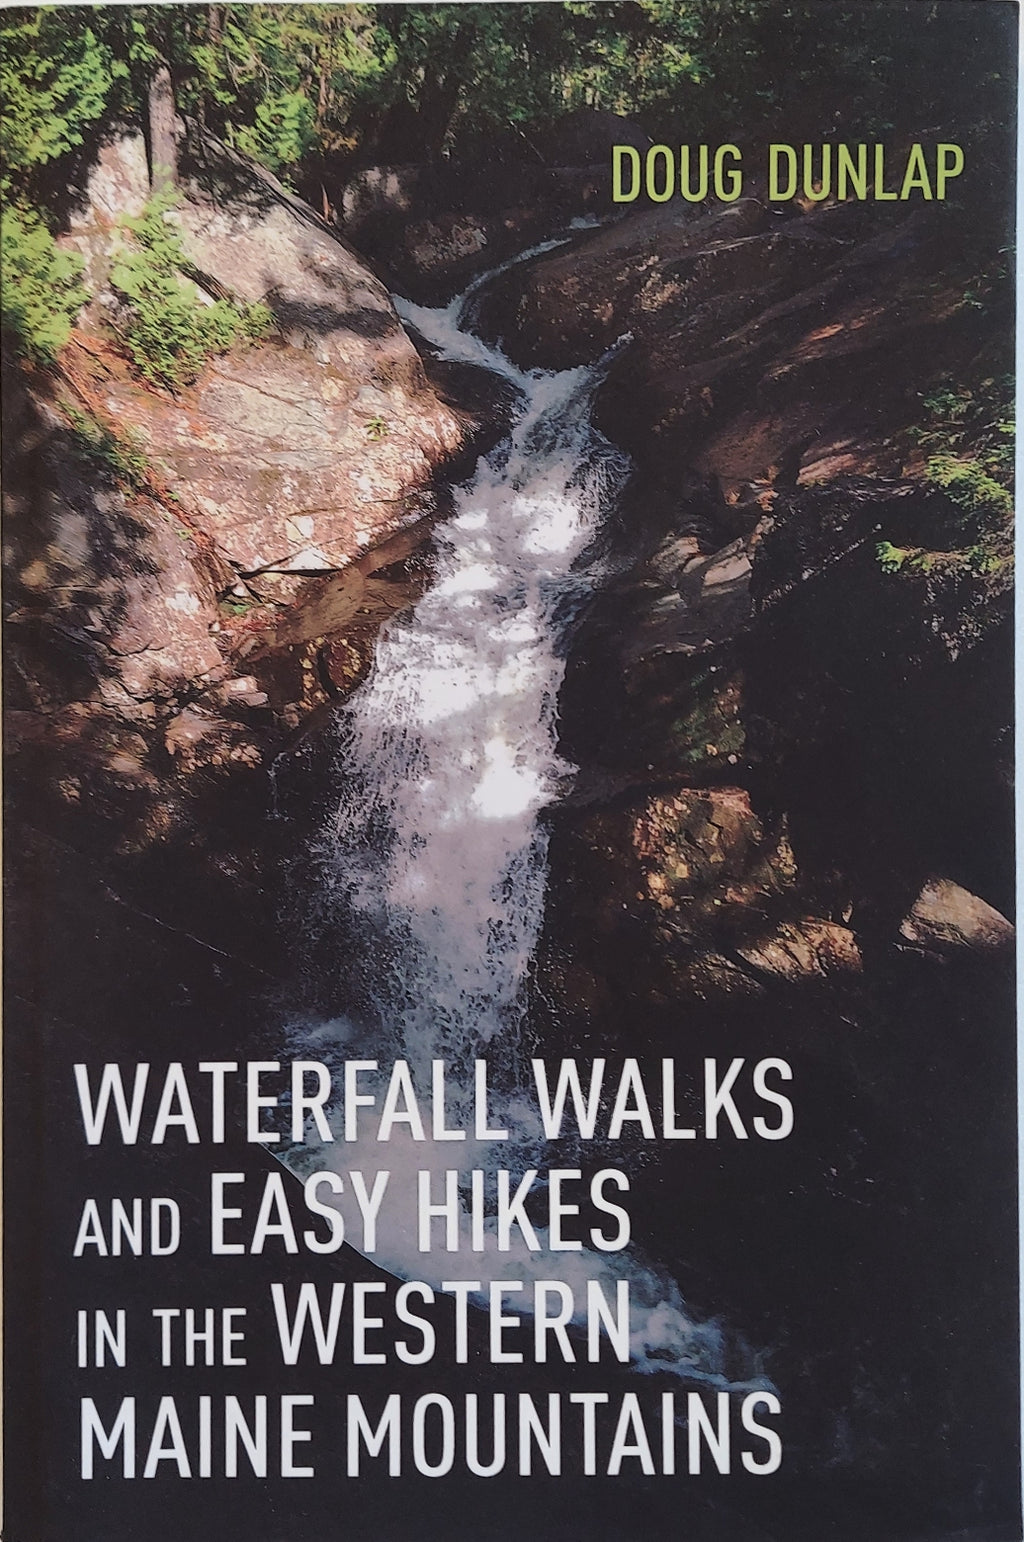 Waterfall Walks and Easy Hikes in the Western Maine Mountains by Doug Dunlap